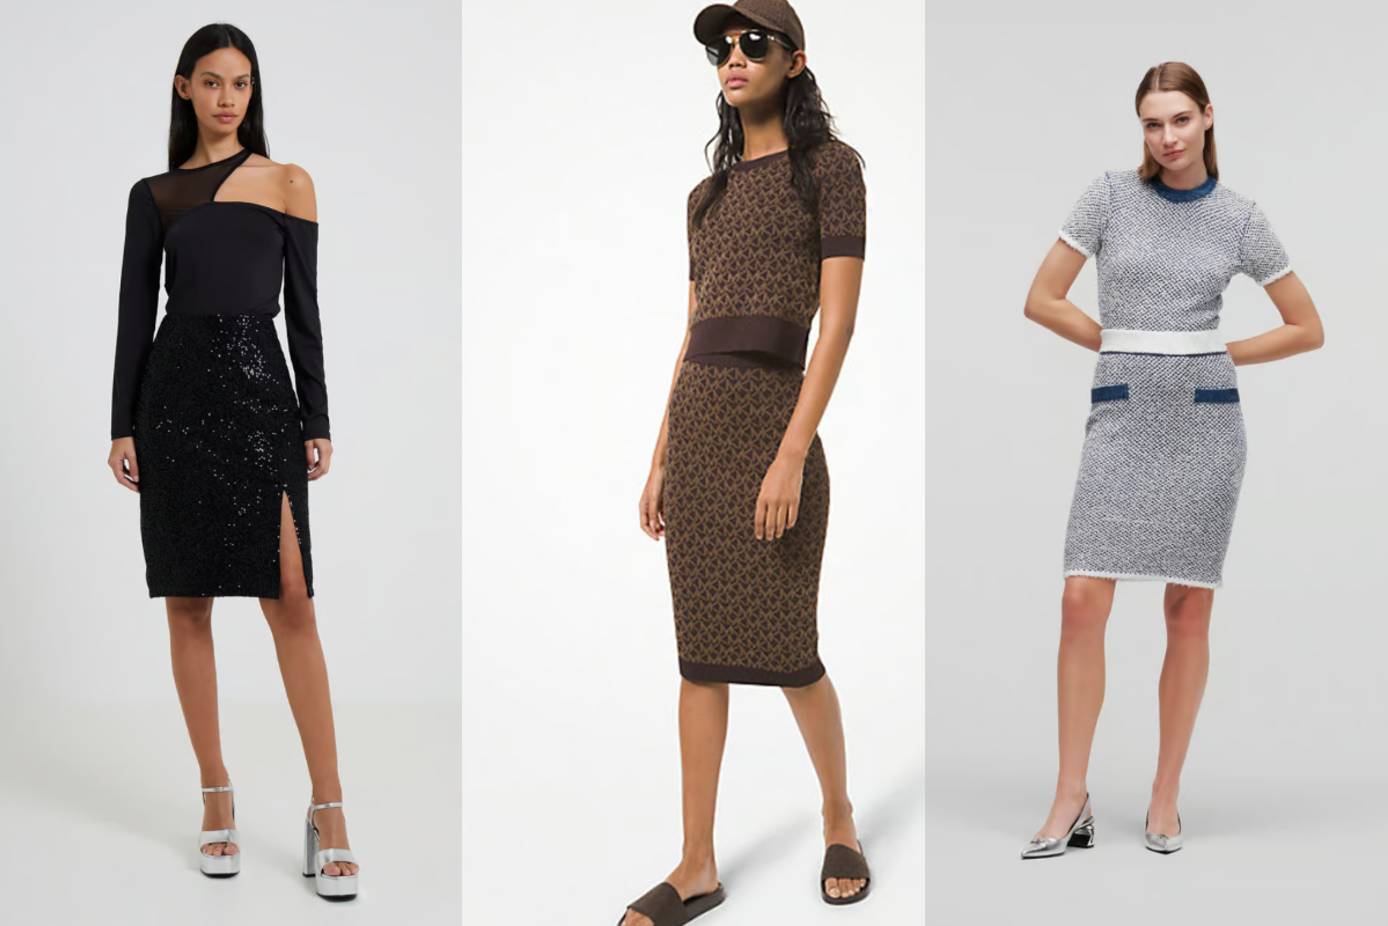 History of the pencil skirt